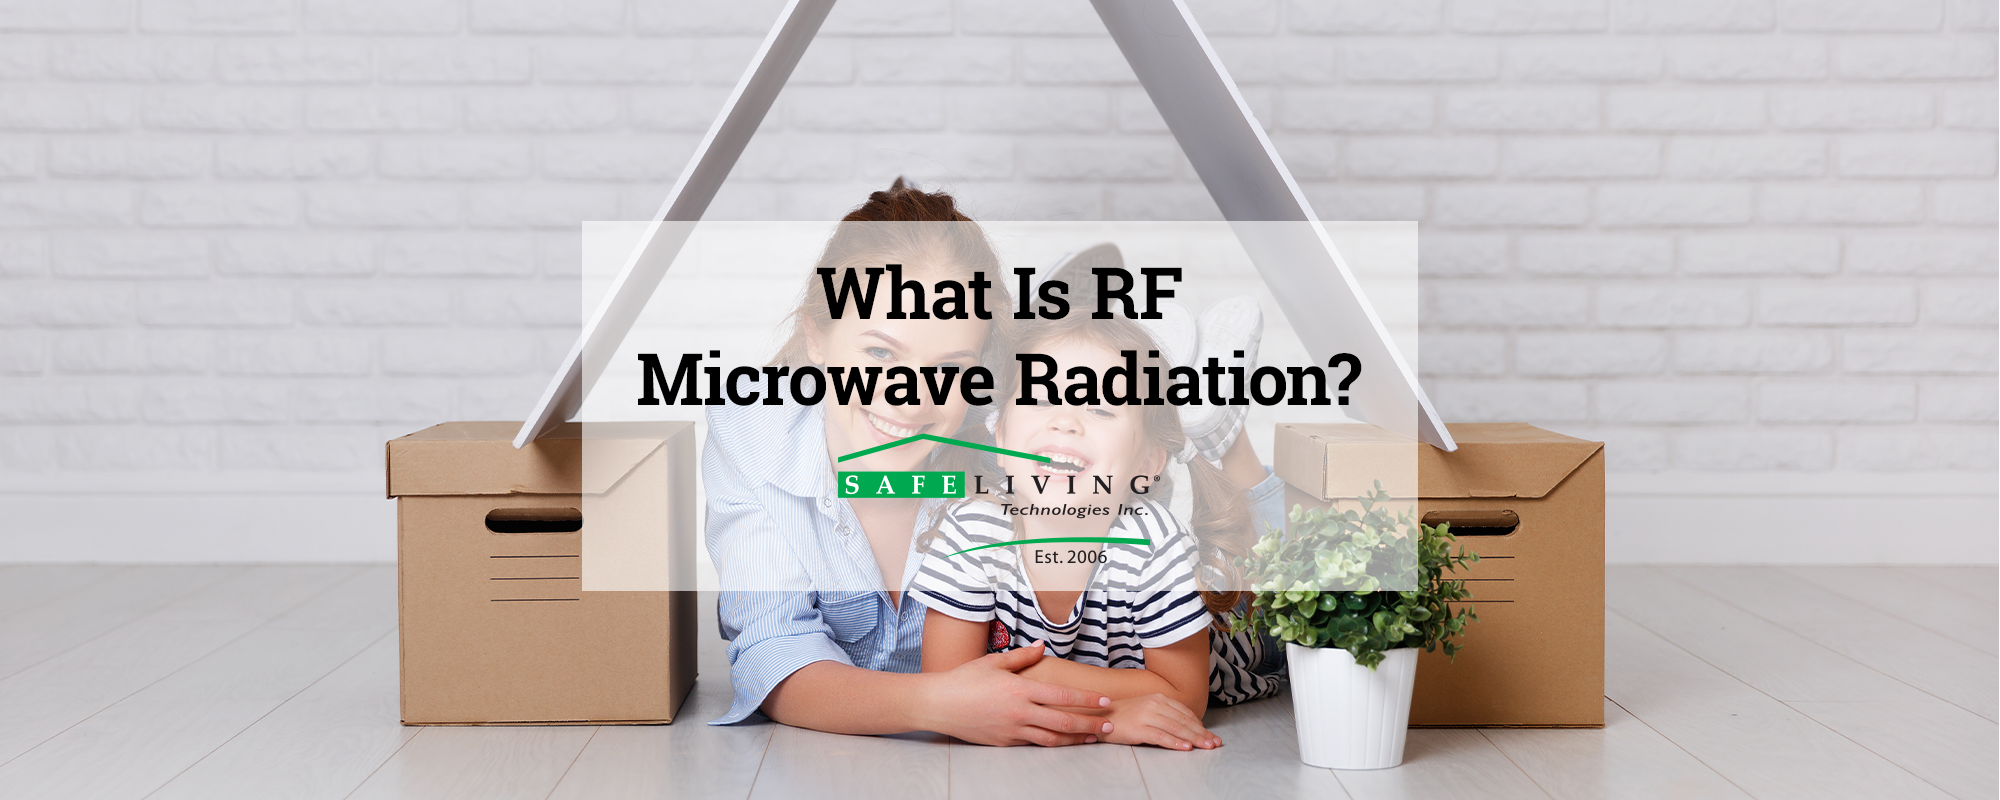 What Is RF Microwave Radiation